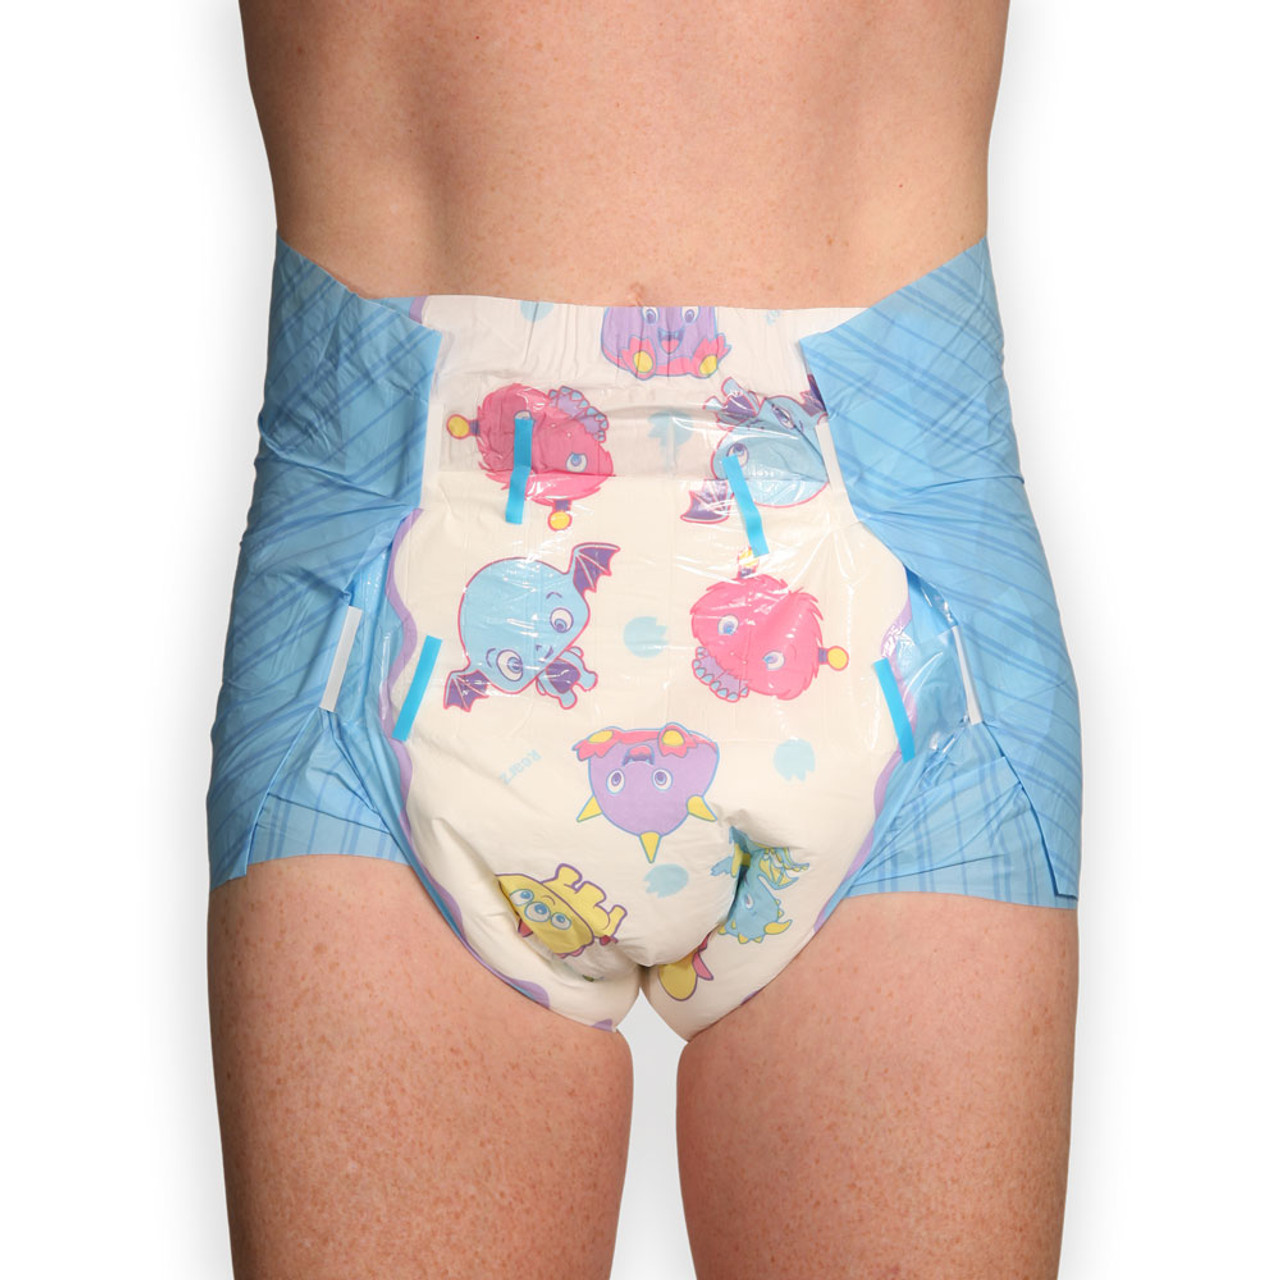 Lil' Monsters Adult Diaper Wrap